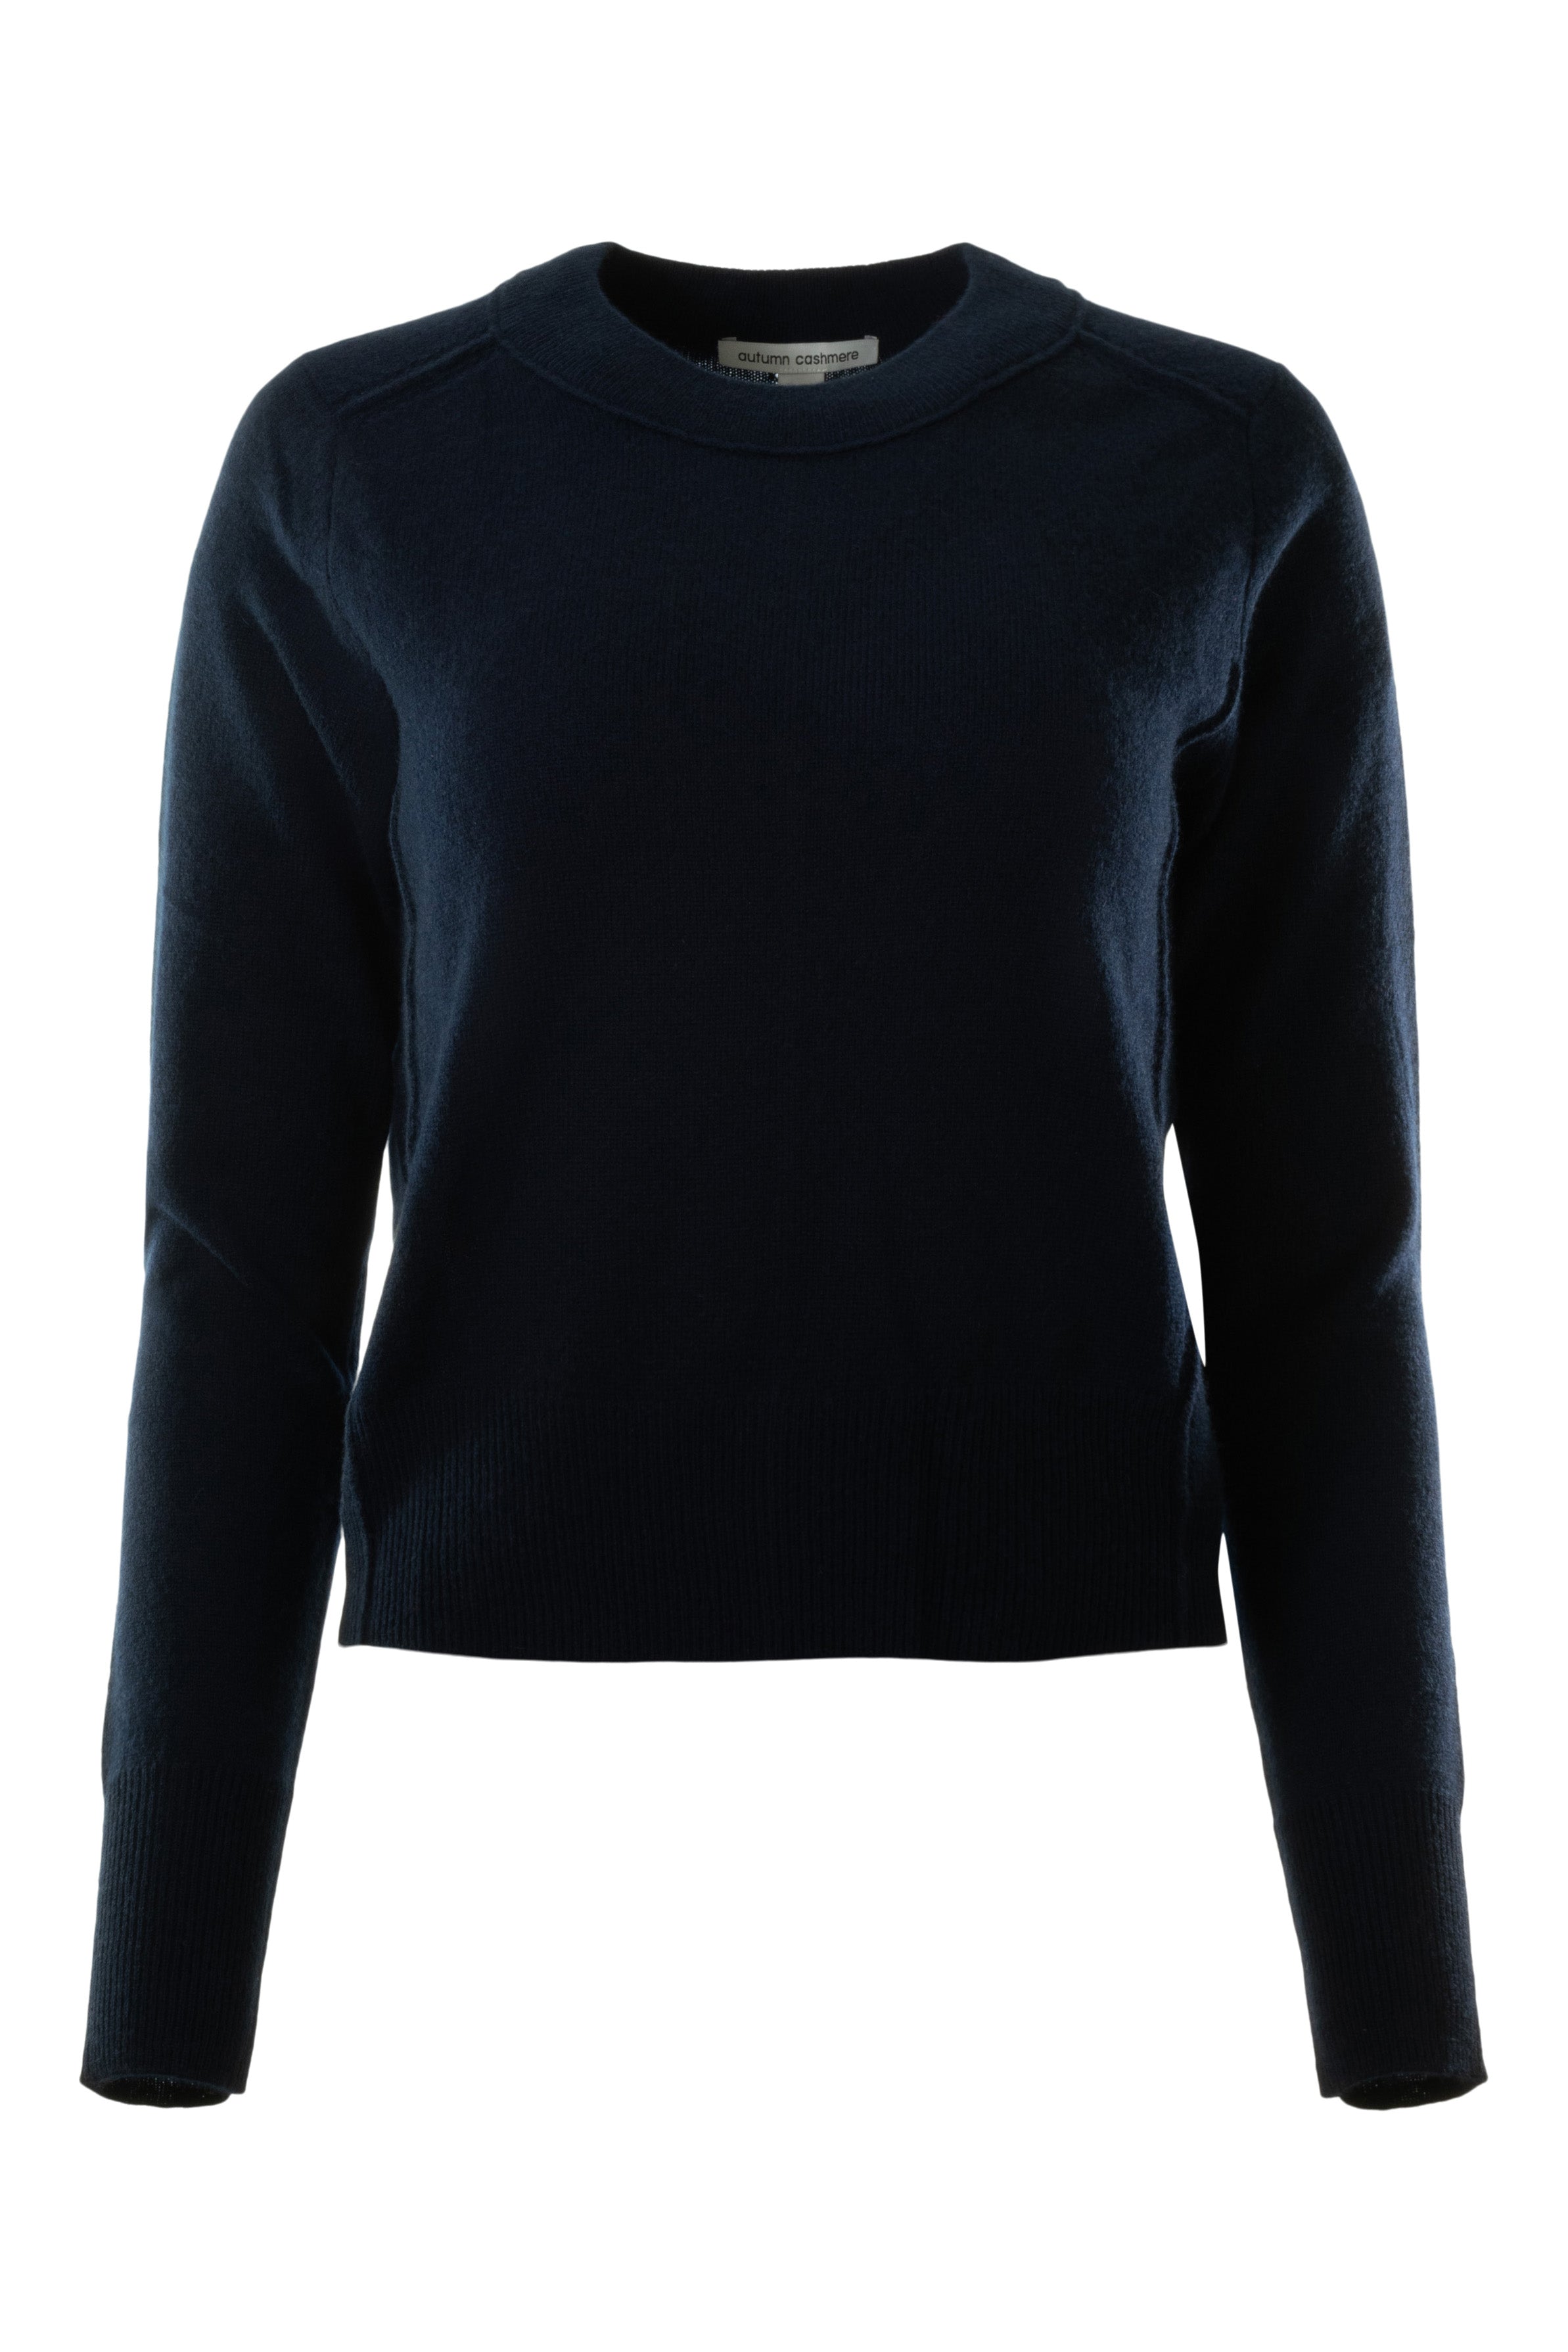 Autumn Cashmere Crewneck Sweater with Reversed Seams in Navy